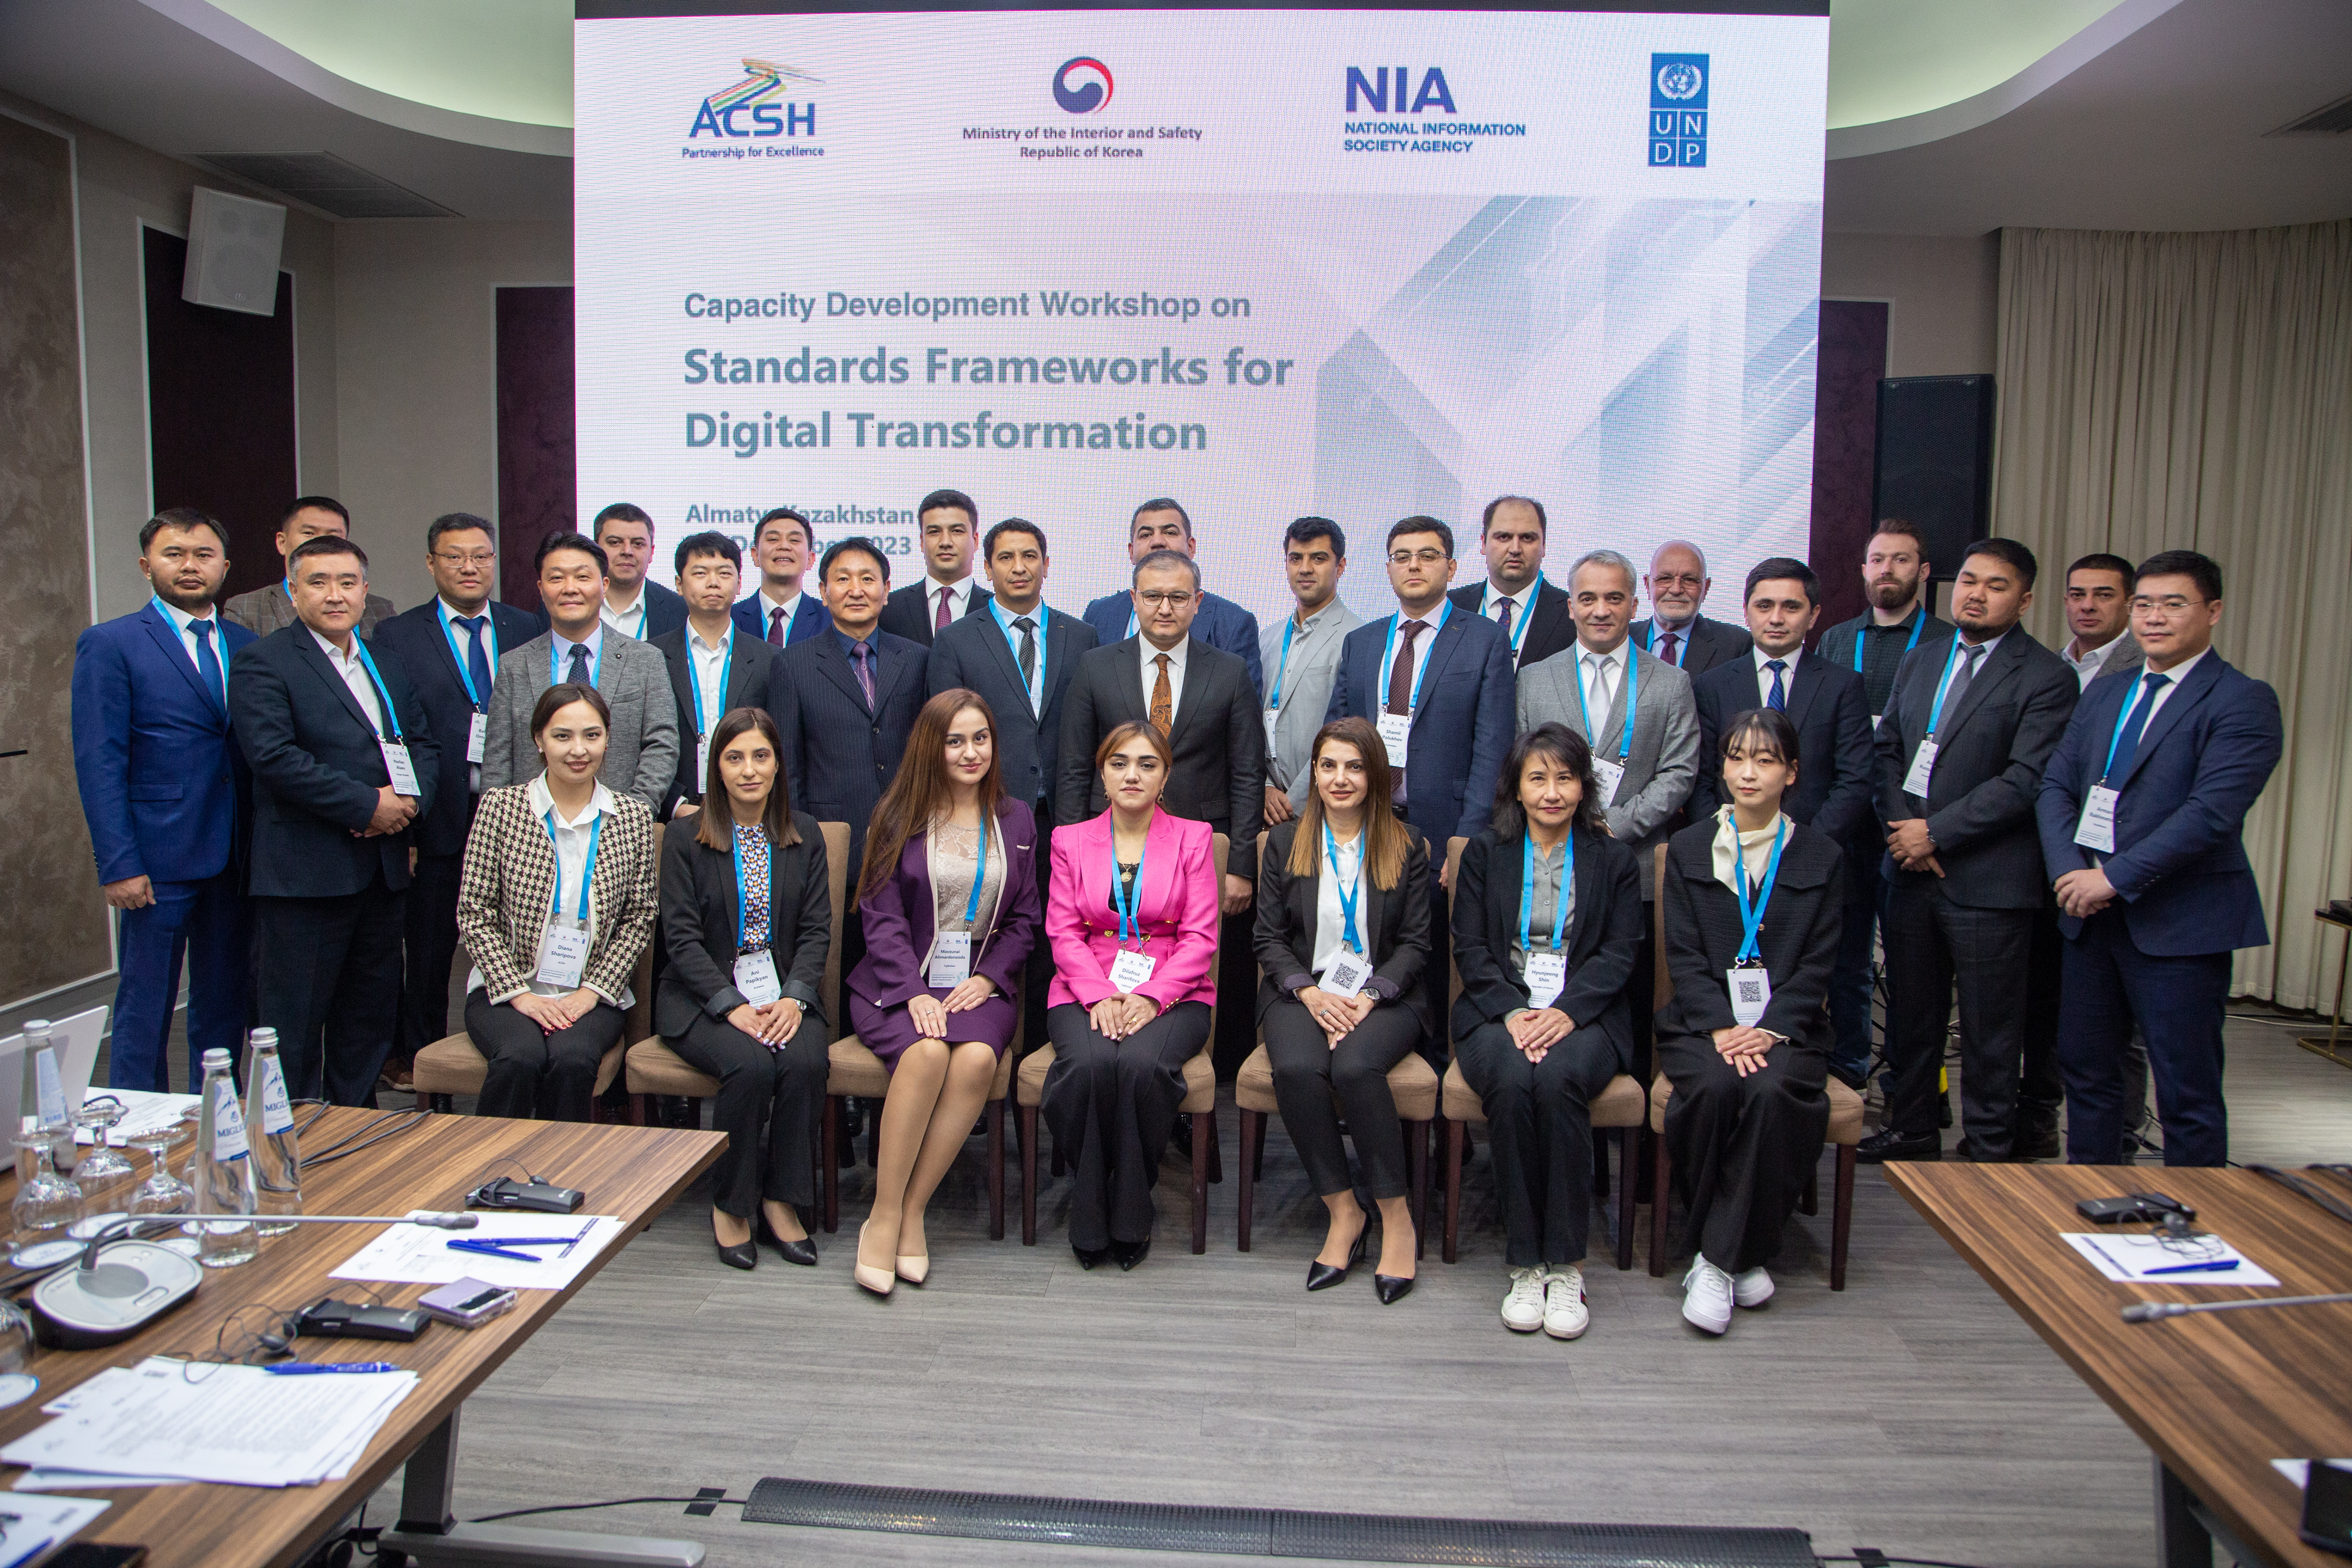 Best Practices in Standardising Digital Transformation were presented to Civil Servants from Central Asia and the Caucasus in Almaty